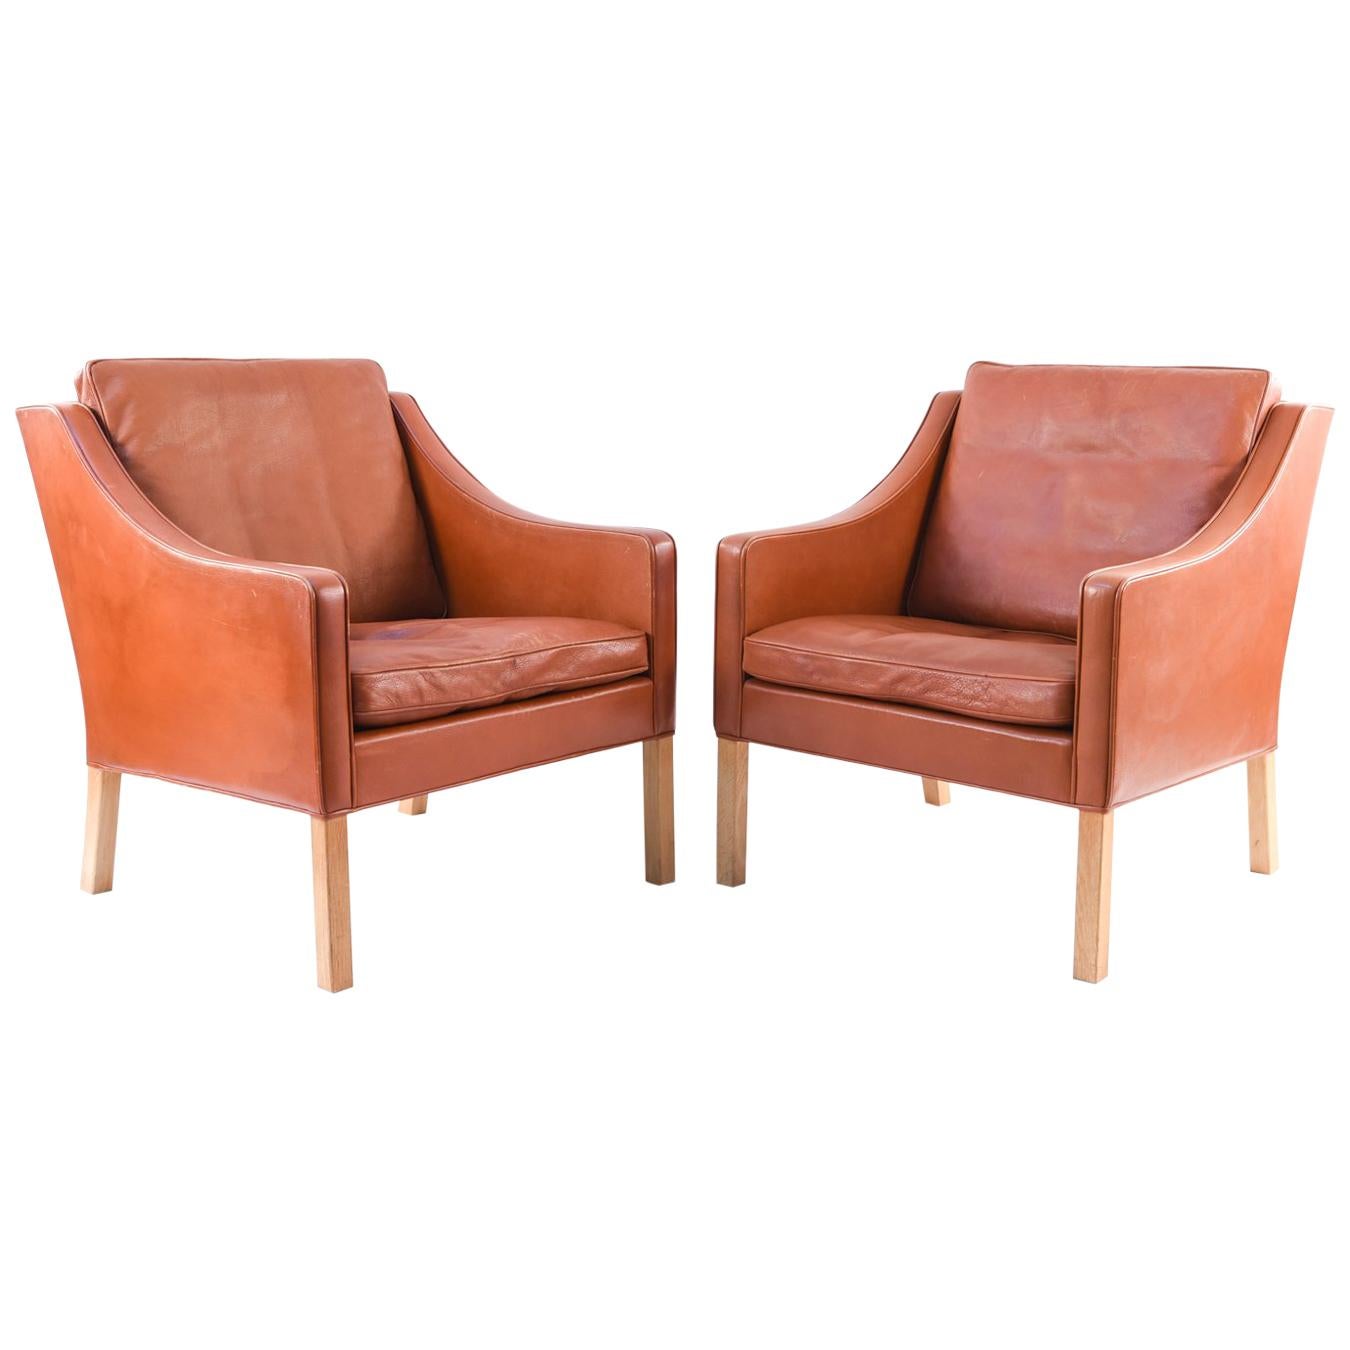 Pair of Børge Mogensen Model #2207 Leather Lounge Chairs